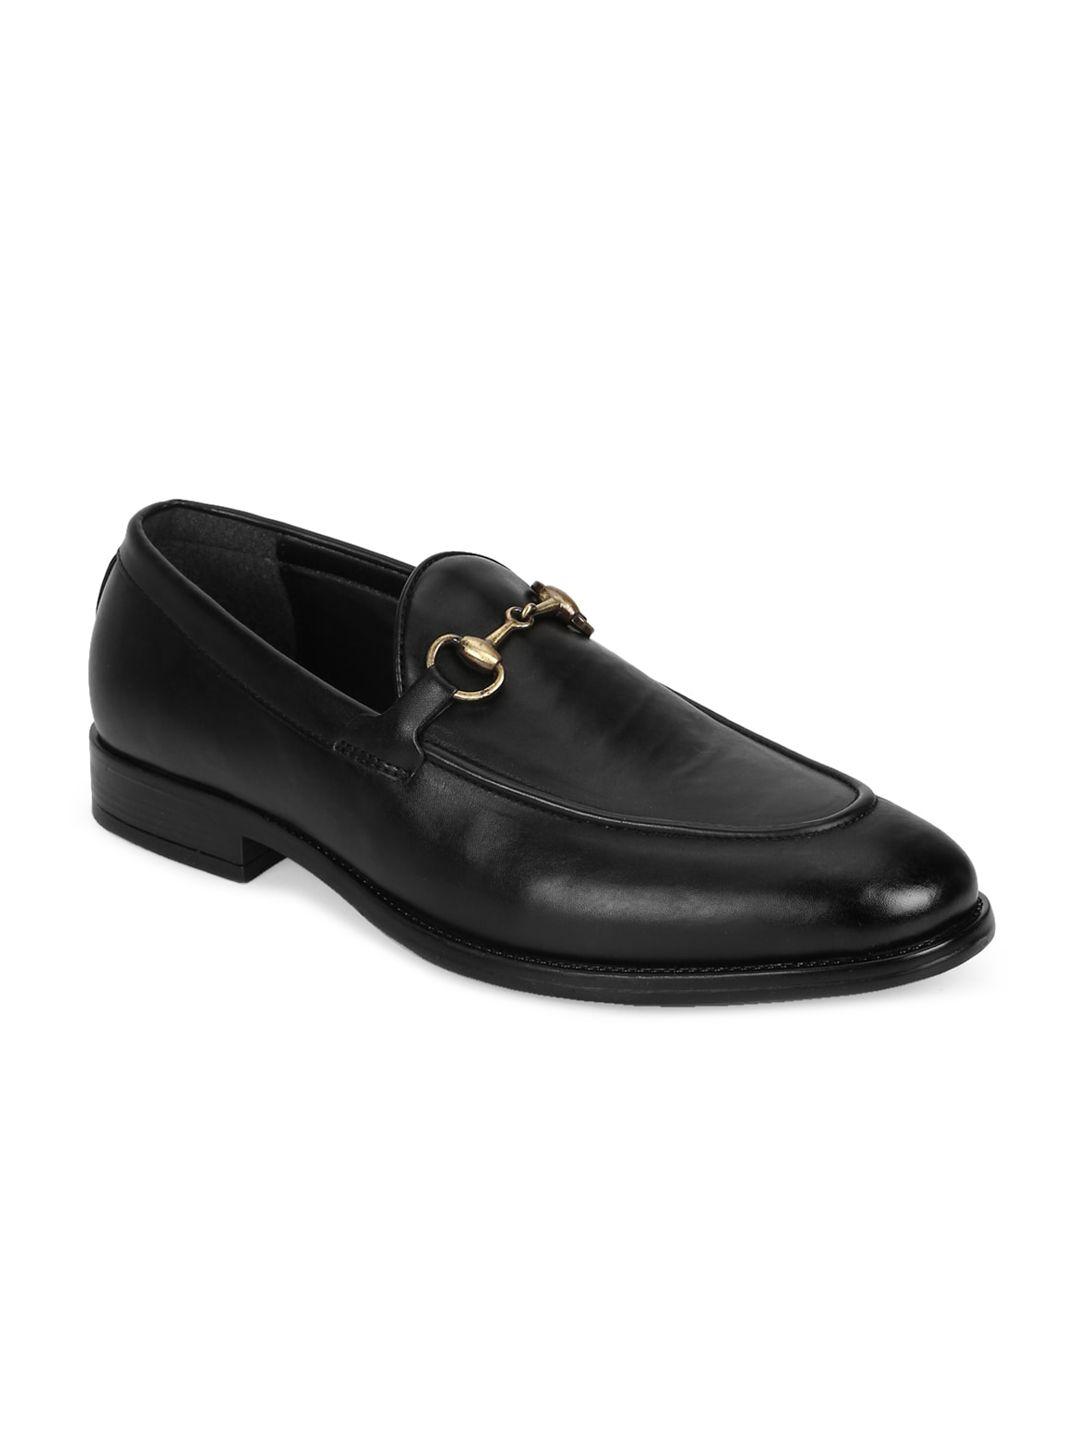 truffle collection men black pu loafers